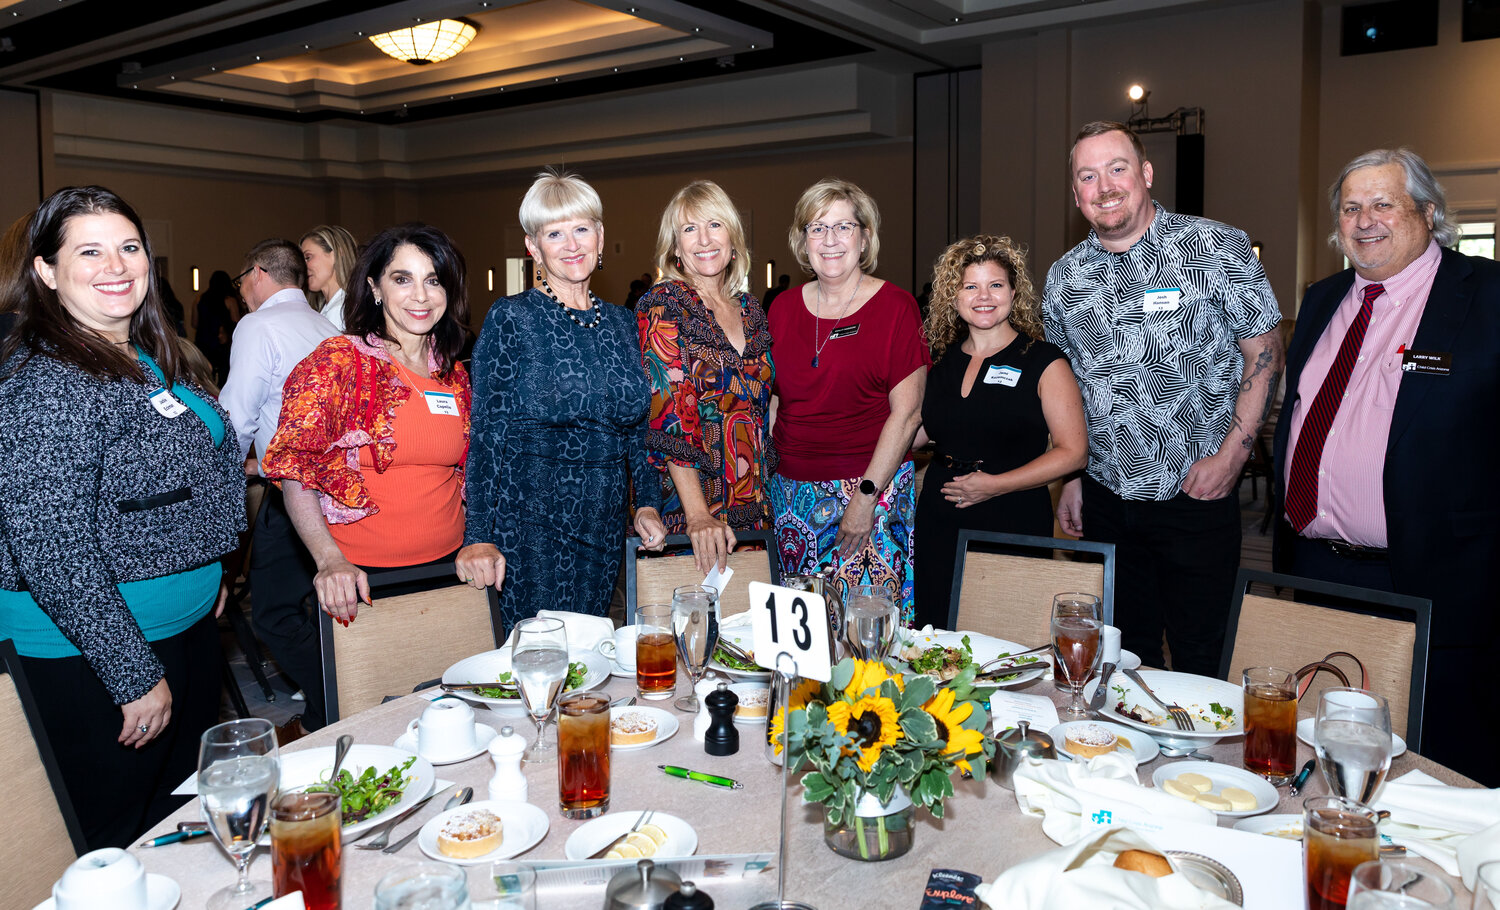 The recent Child Crisis Arizona gala included nonprofit partners, from left, Jackie Eckman, CliftonLarsonAllen principal; Laura Capello, Big Brothers Big Sisters of Arizona president and CEO; Laura Bartlett, BOK Financial senior VP; Katie Pushor, executive coach, Inner Capital; Holly Hanson, Child Crisis Arizona executive assistant; Jami Kozemczak, Ballet Arizona executive director; Josh Hanson, Avenue5 Residential graphic designer; and Larry Wilk, Child Crisis Arizona board member.